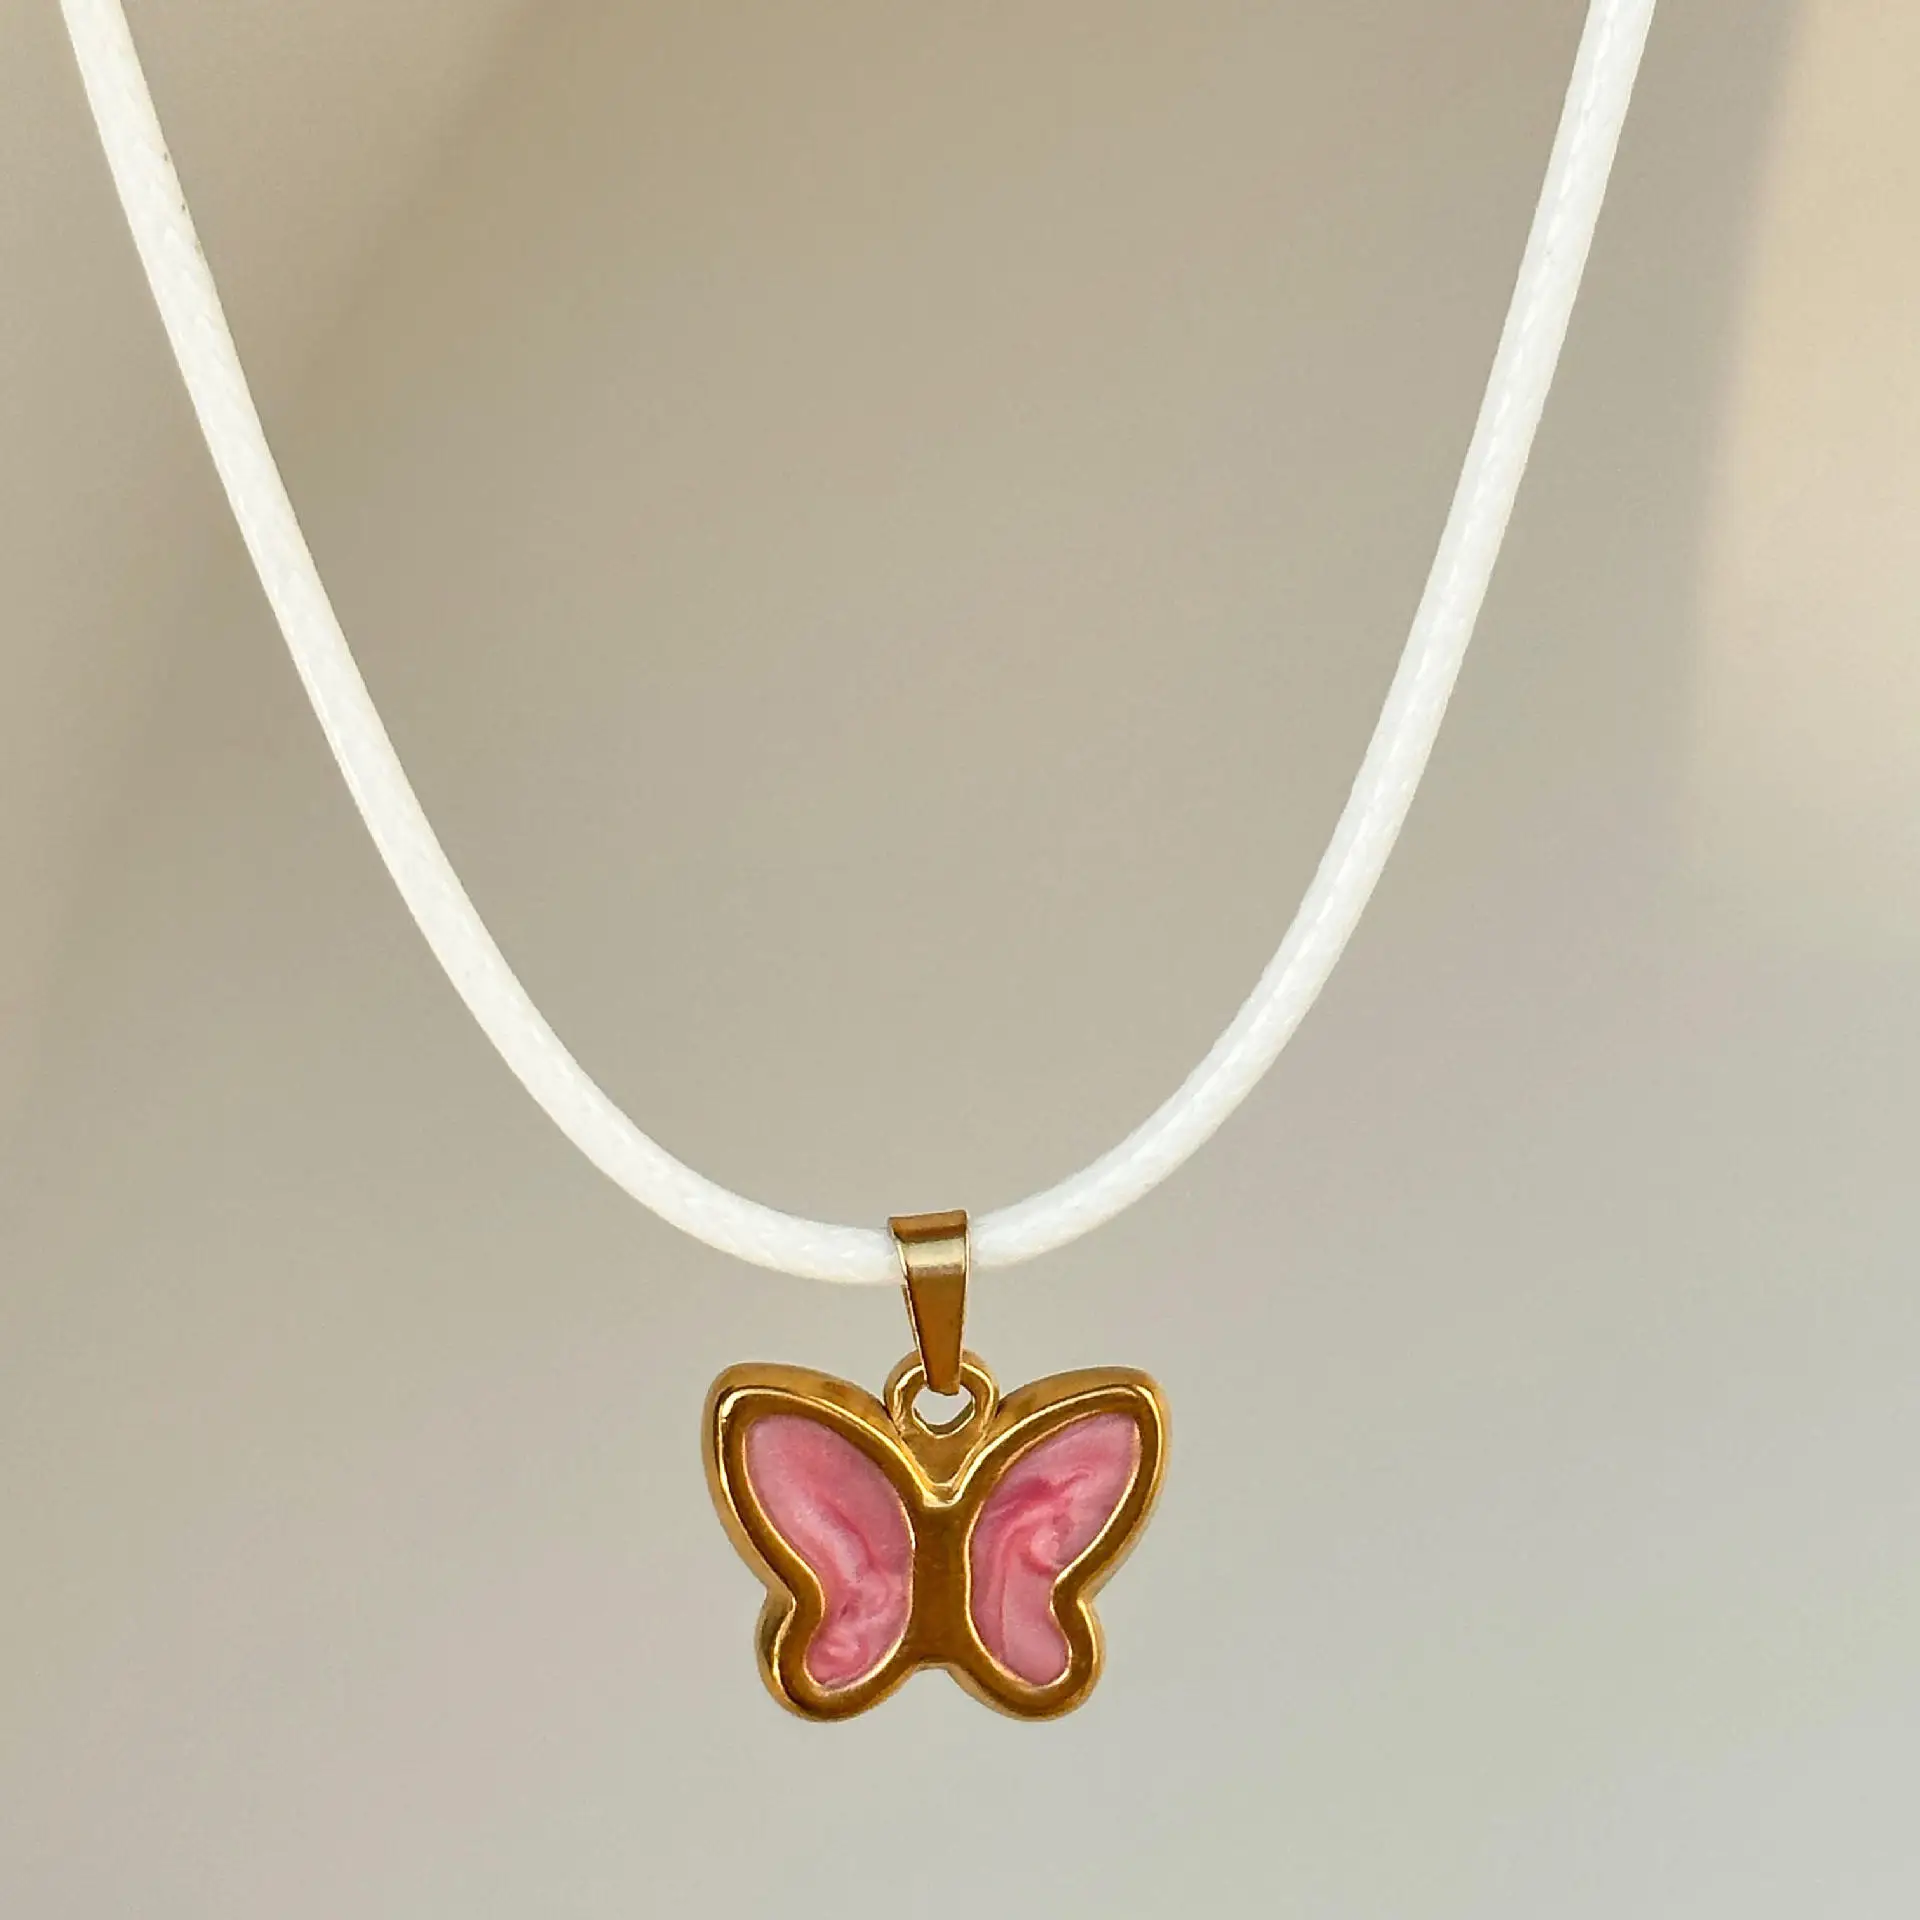 new fashion leather necklace cord 18k gold plated enamel butterfly choker necklace